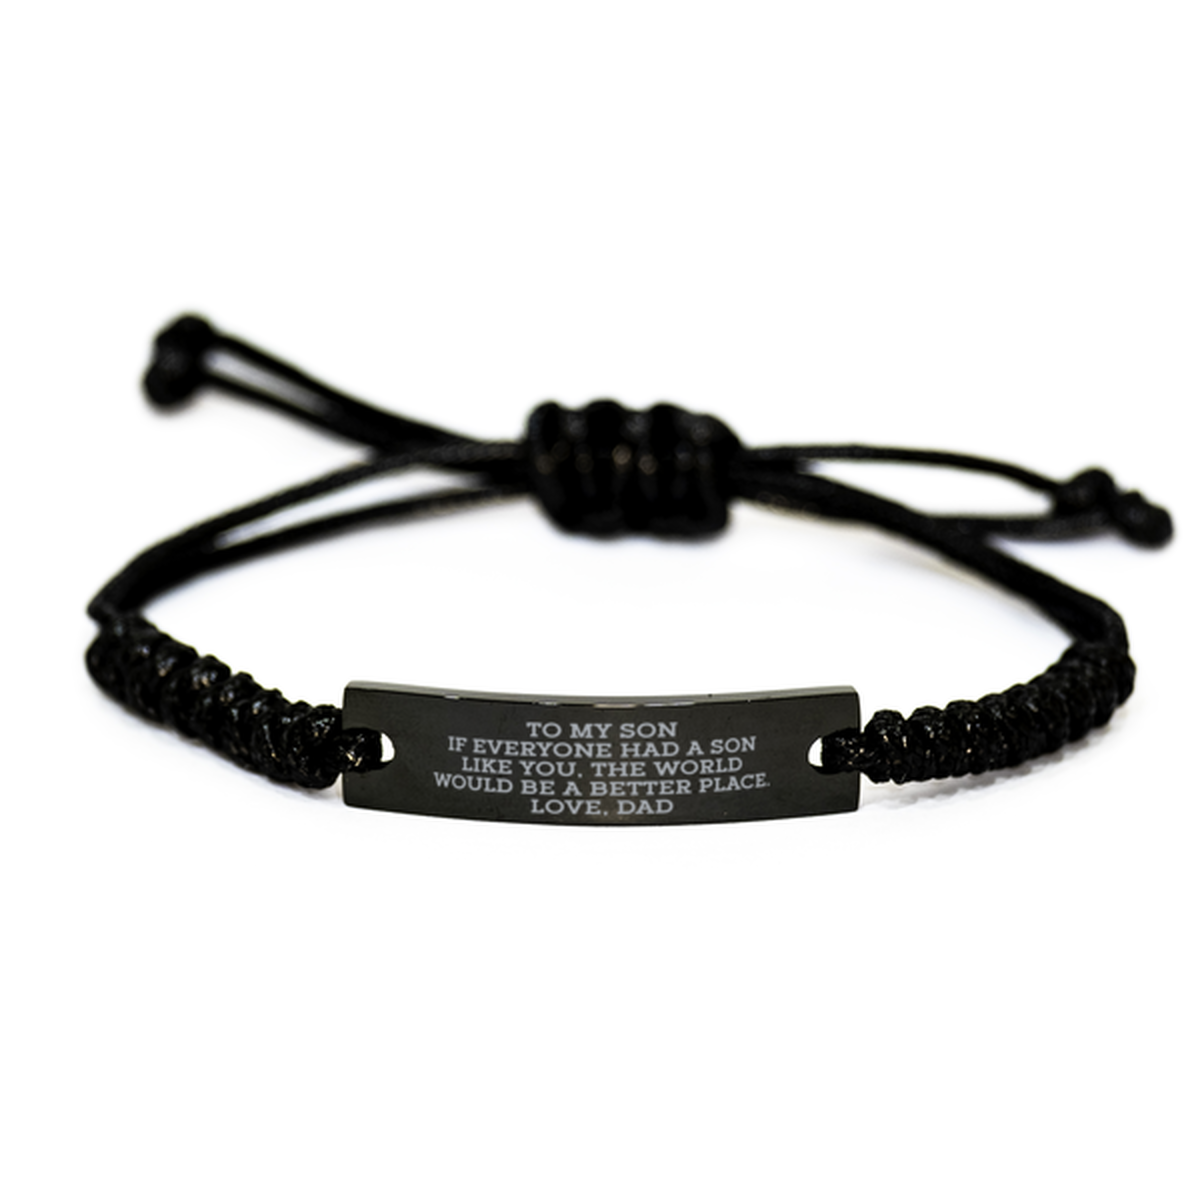 To My Son Rope Bracelet, If Everyone Had A Son Like You, Graduation Day Gifts For Son From Dad, Birthday Gifts For Men